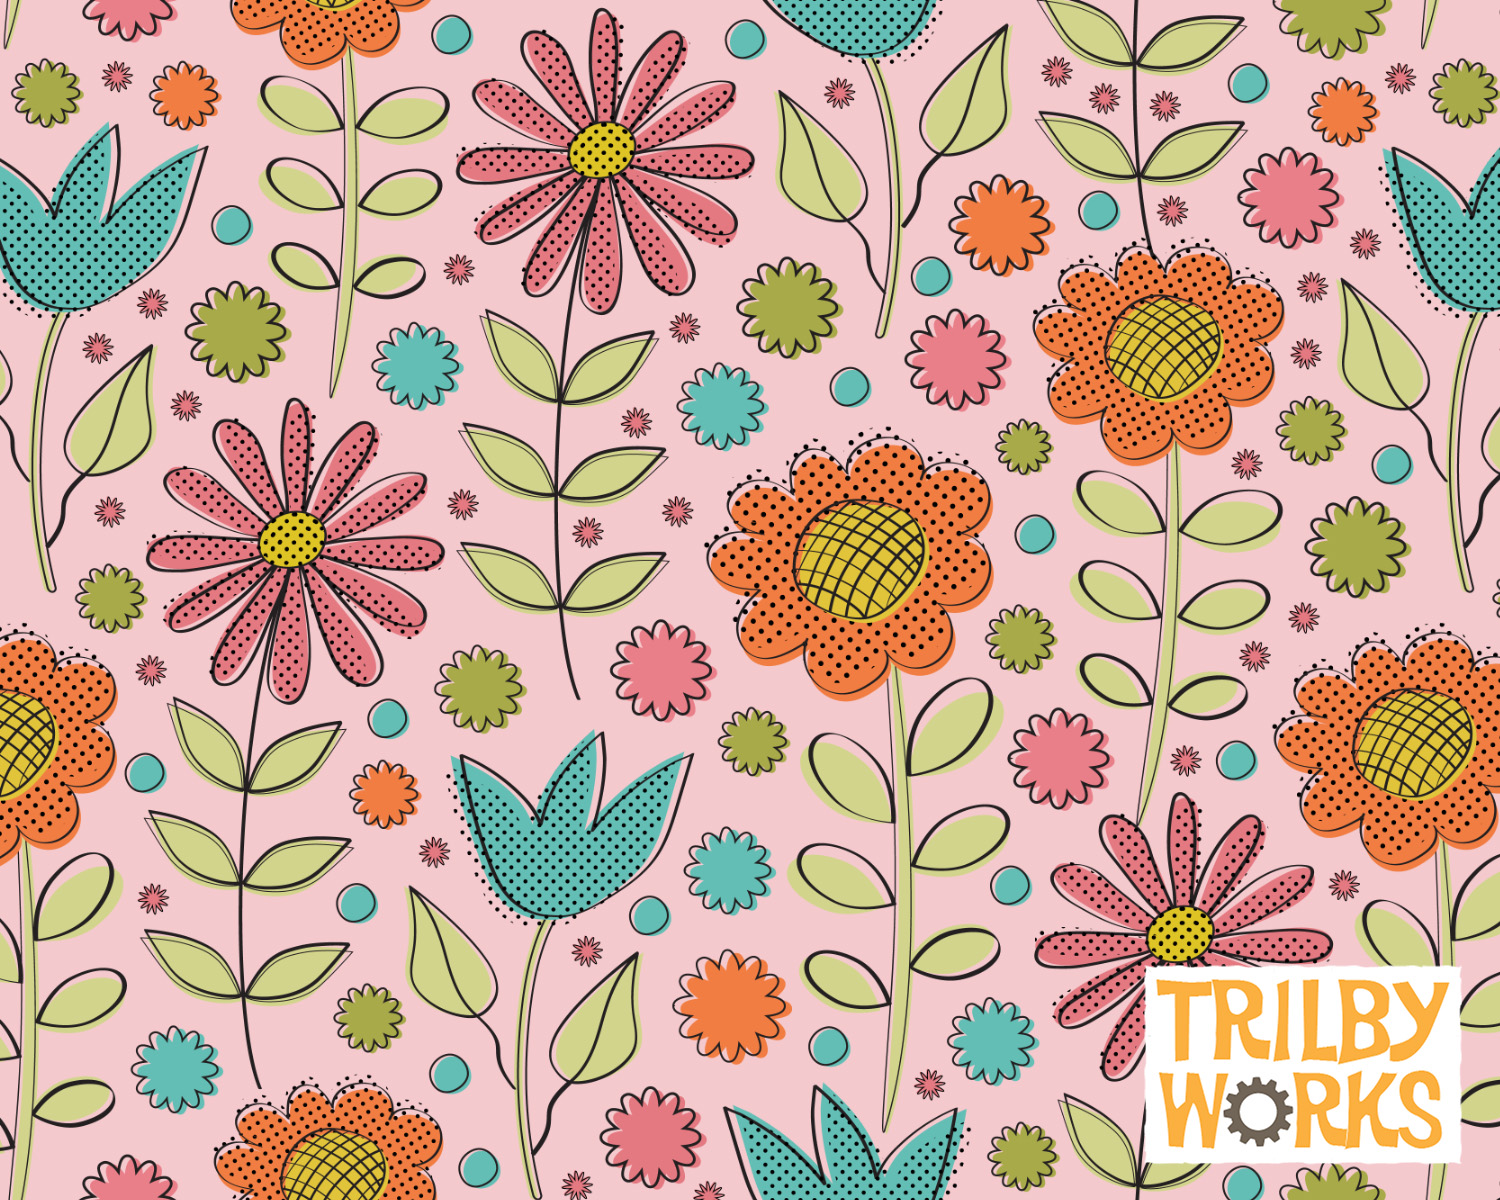 Retro Flowers Pink by Trilby Works